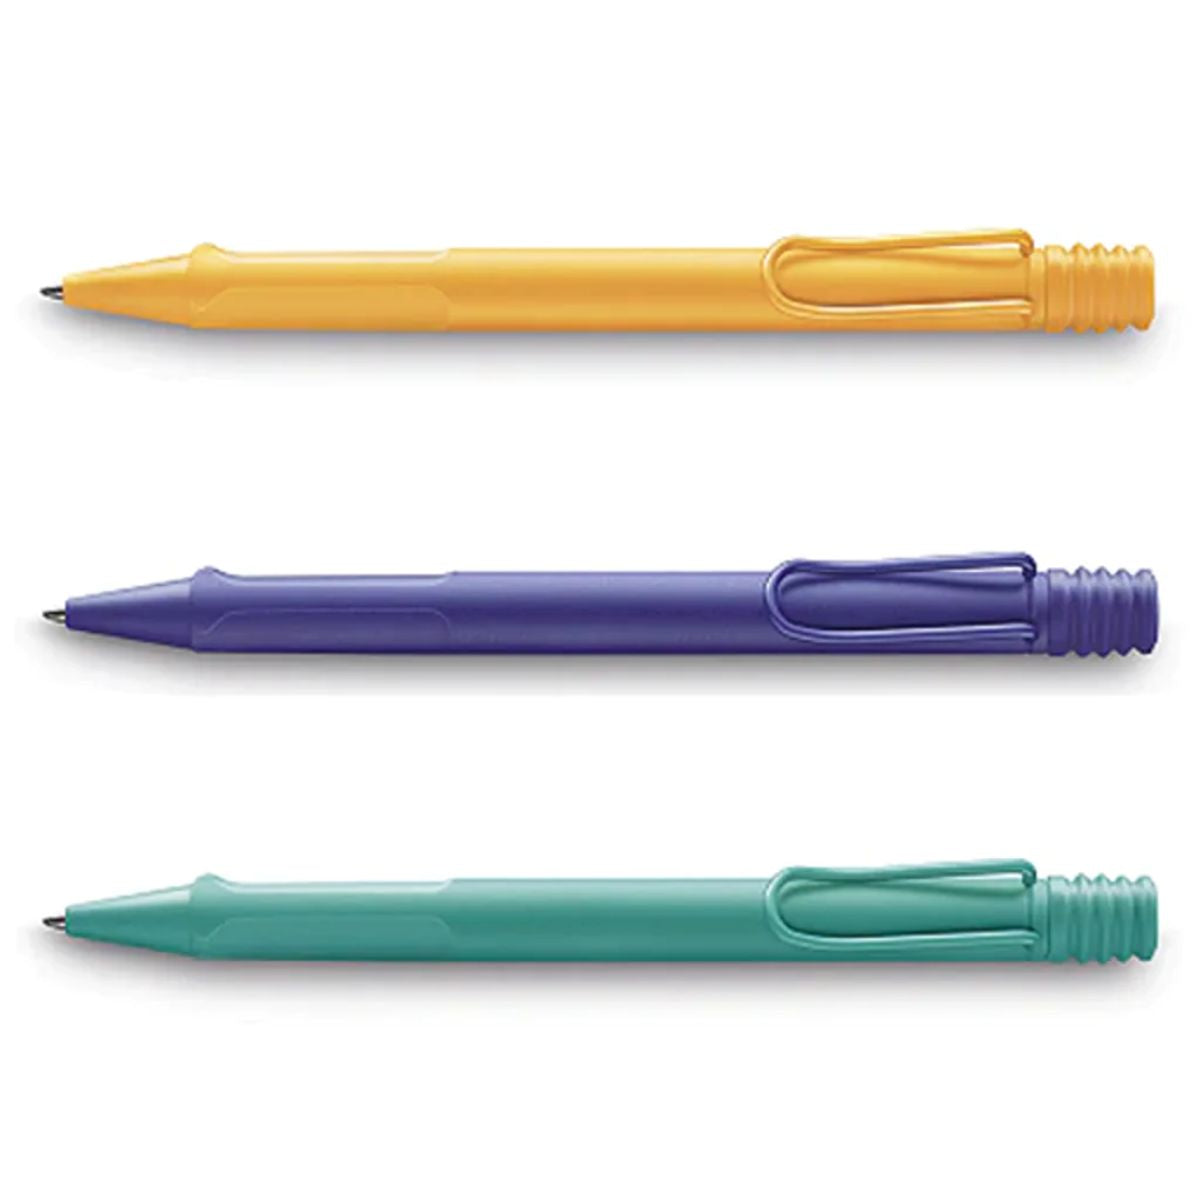 Three Safari Pens in yellow, purple, and green colors, aligned vertically on a white background.